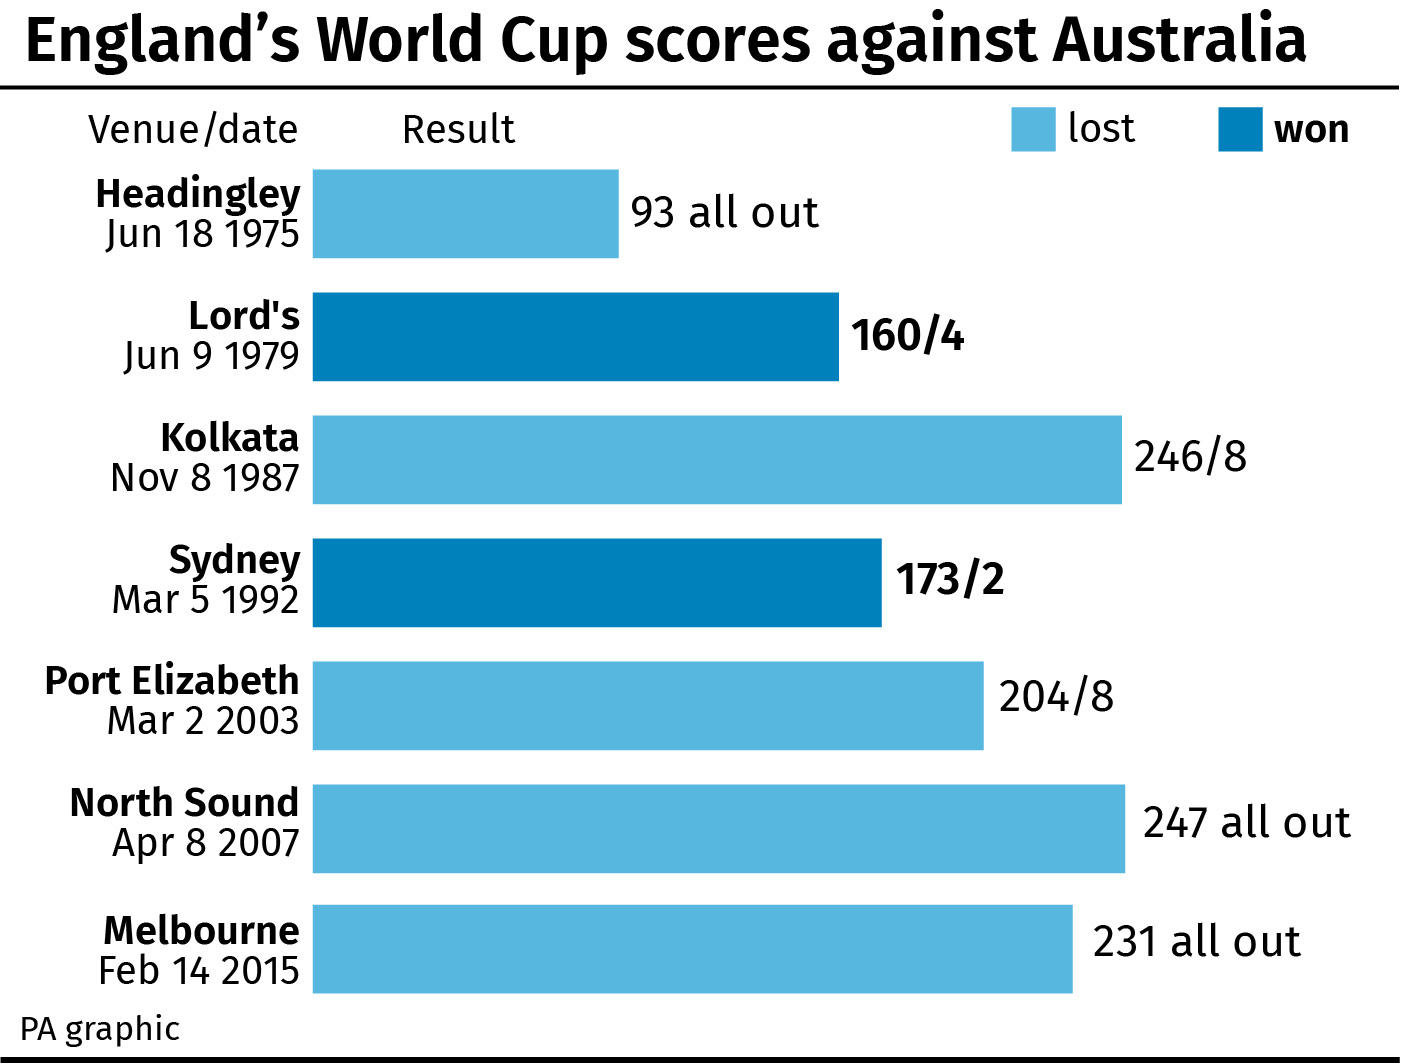 England's World Cup record against Australia